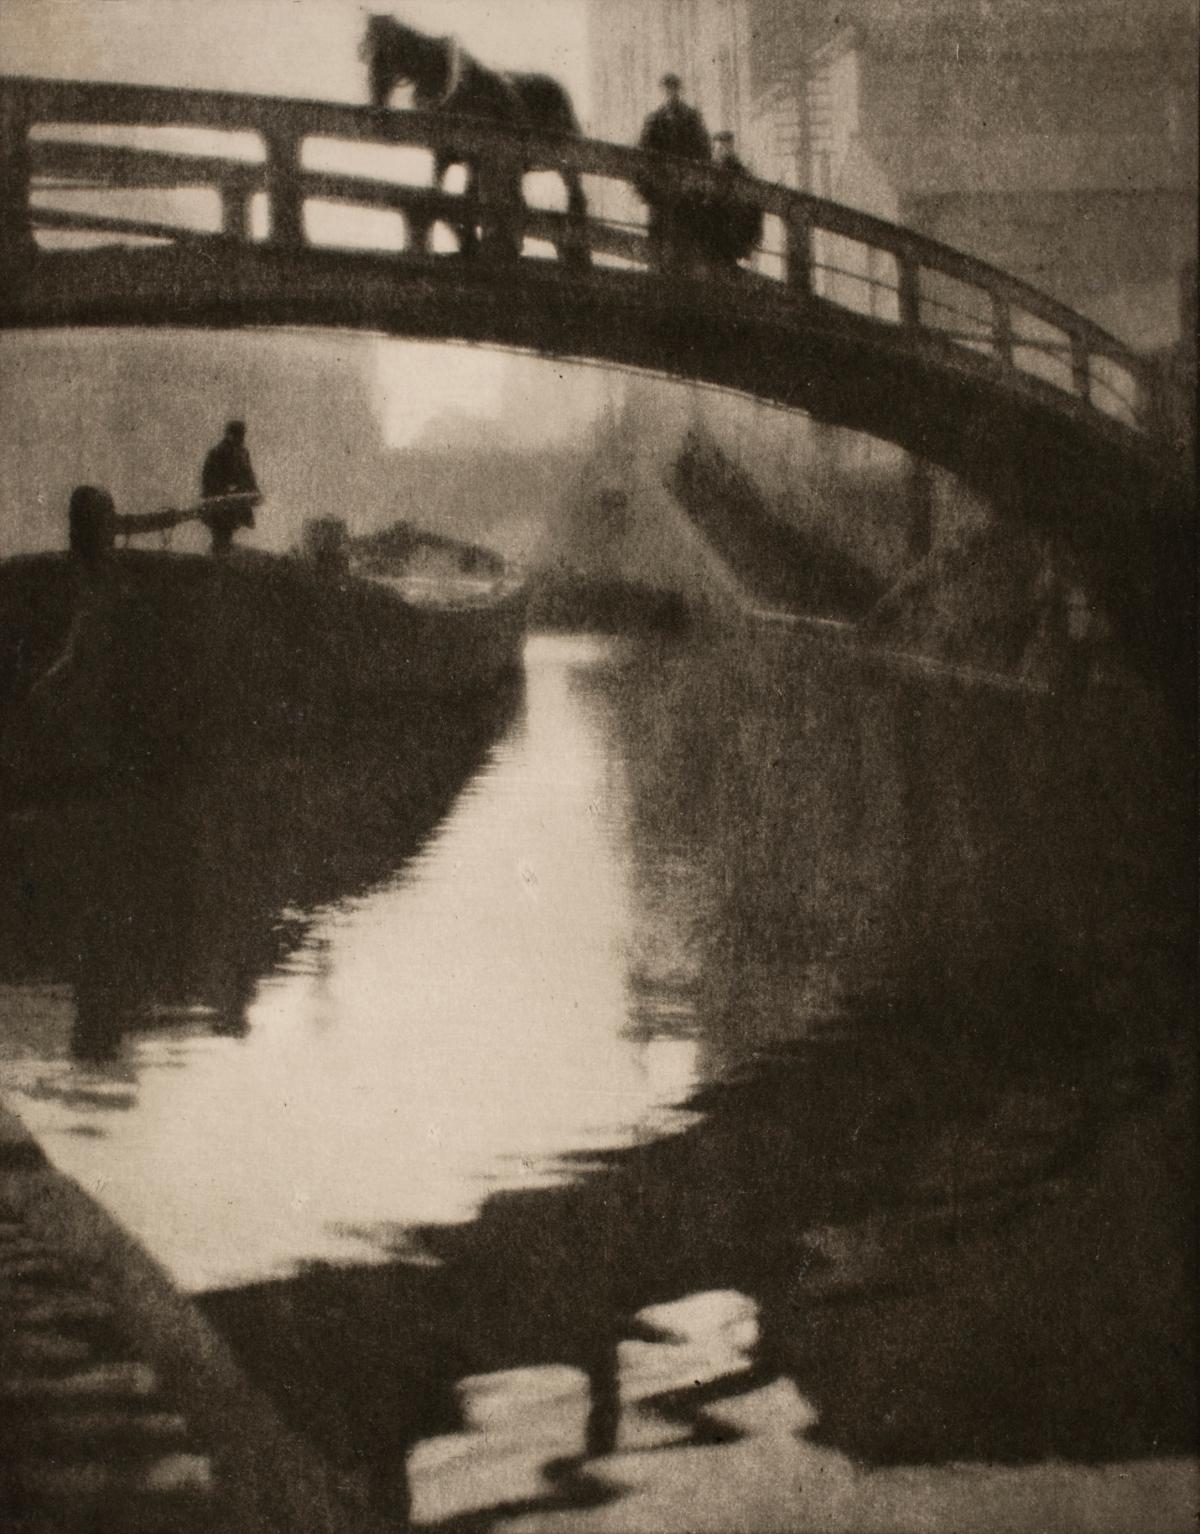 From the point of view of someone on the canal water: a bridge with a man and his horse crossing, with a boat up ahead, manned by a single figure, all in shades of black and beige